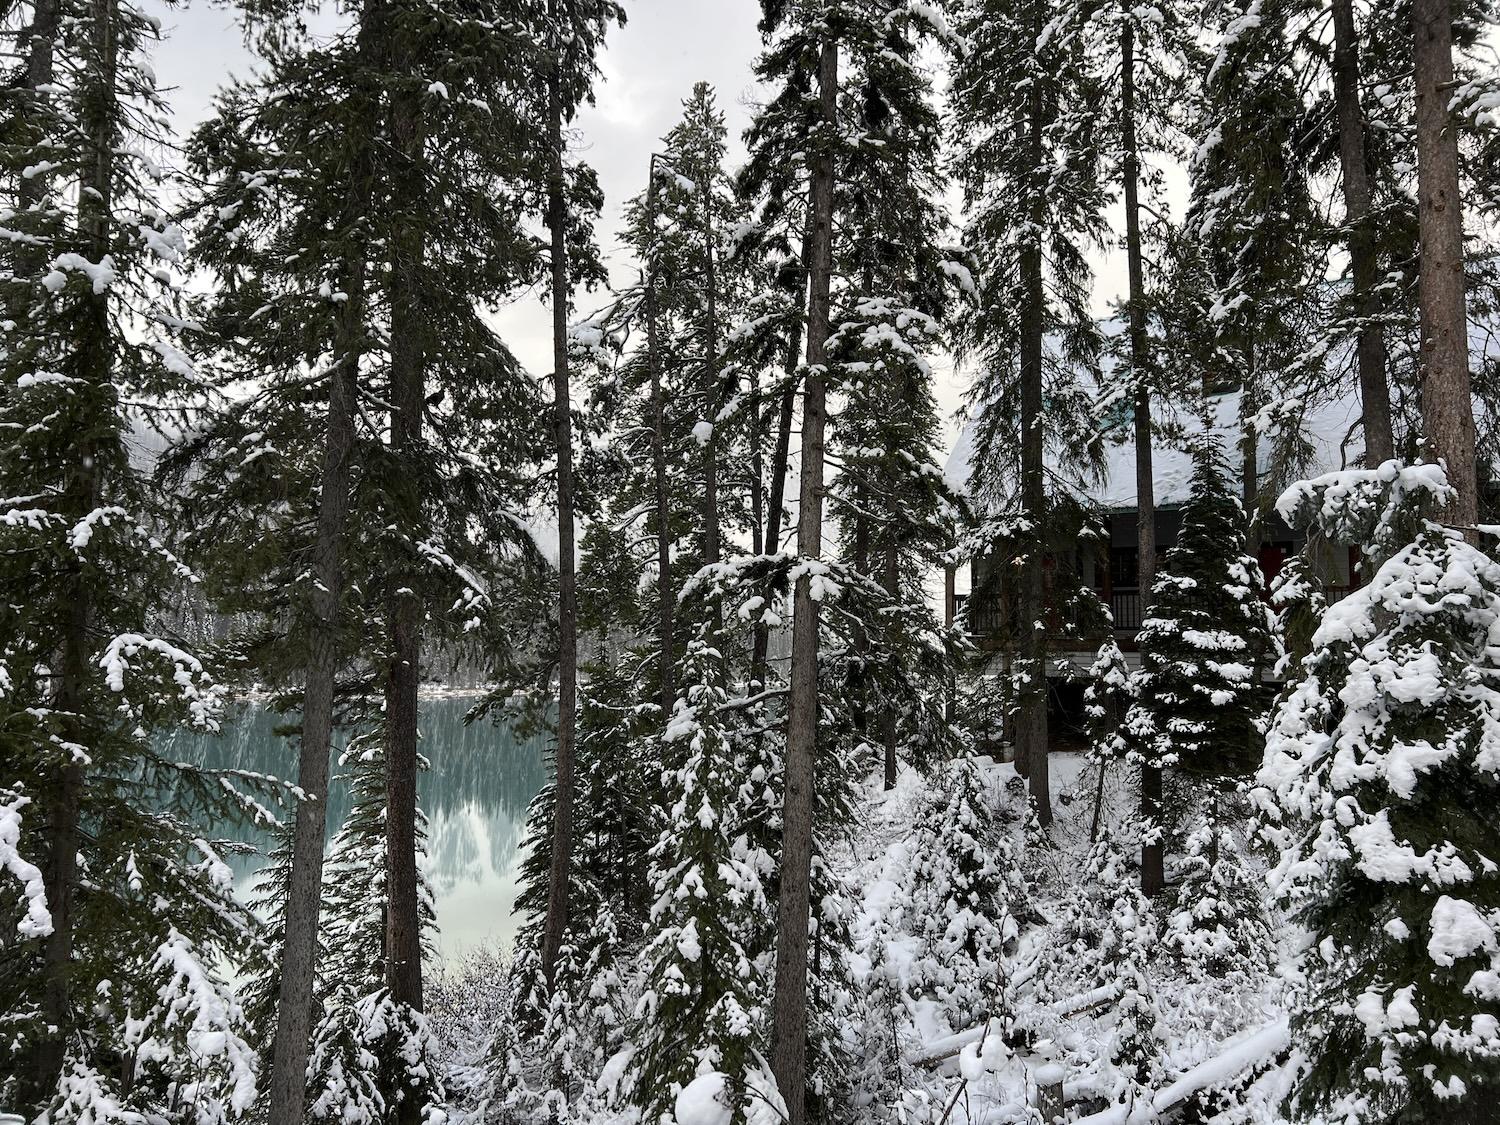 Emerald Lake Lodge is perched on the edge of Emerald Lake in Yoho National Park.